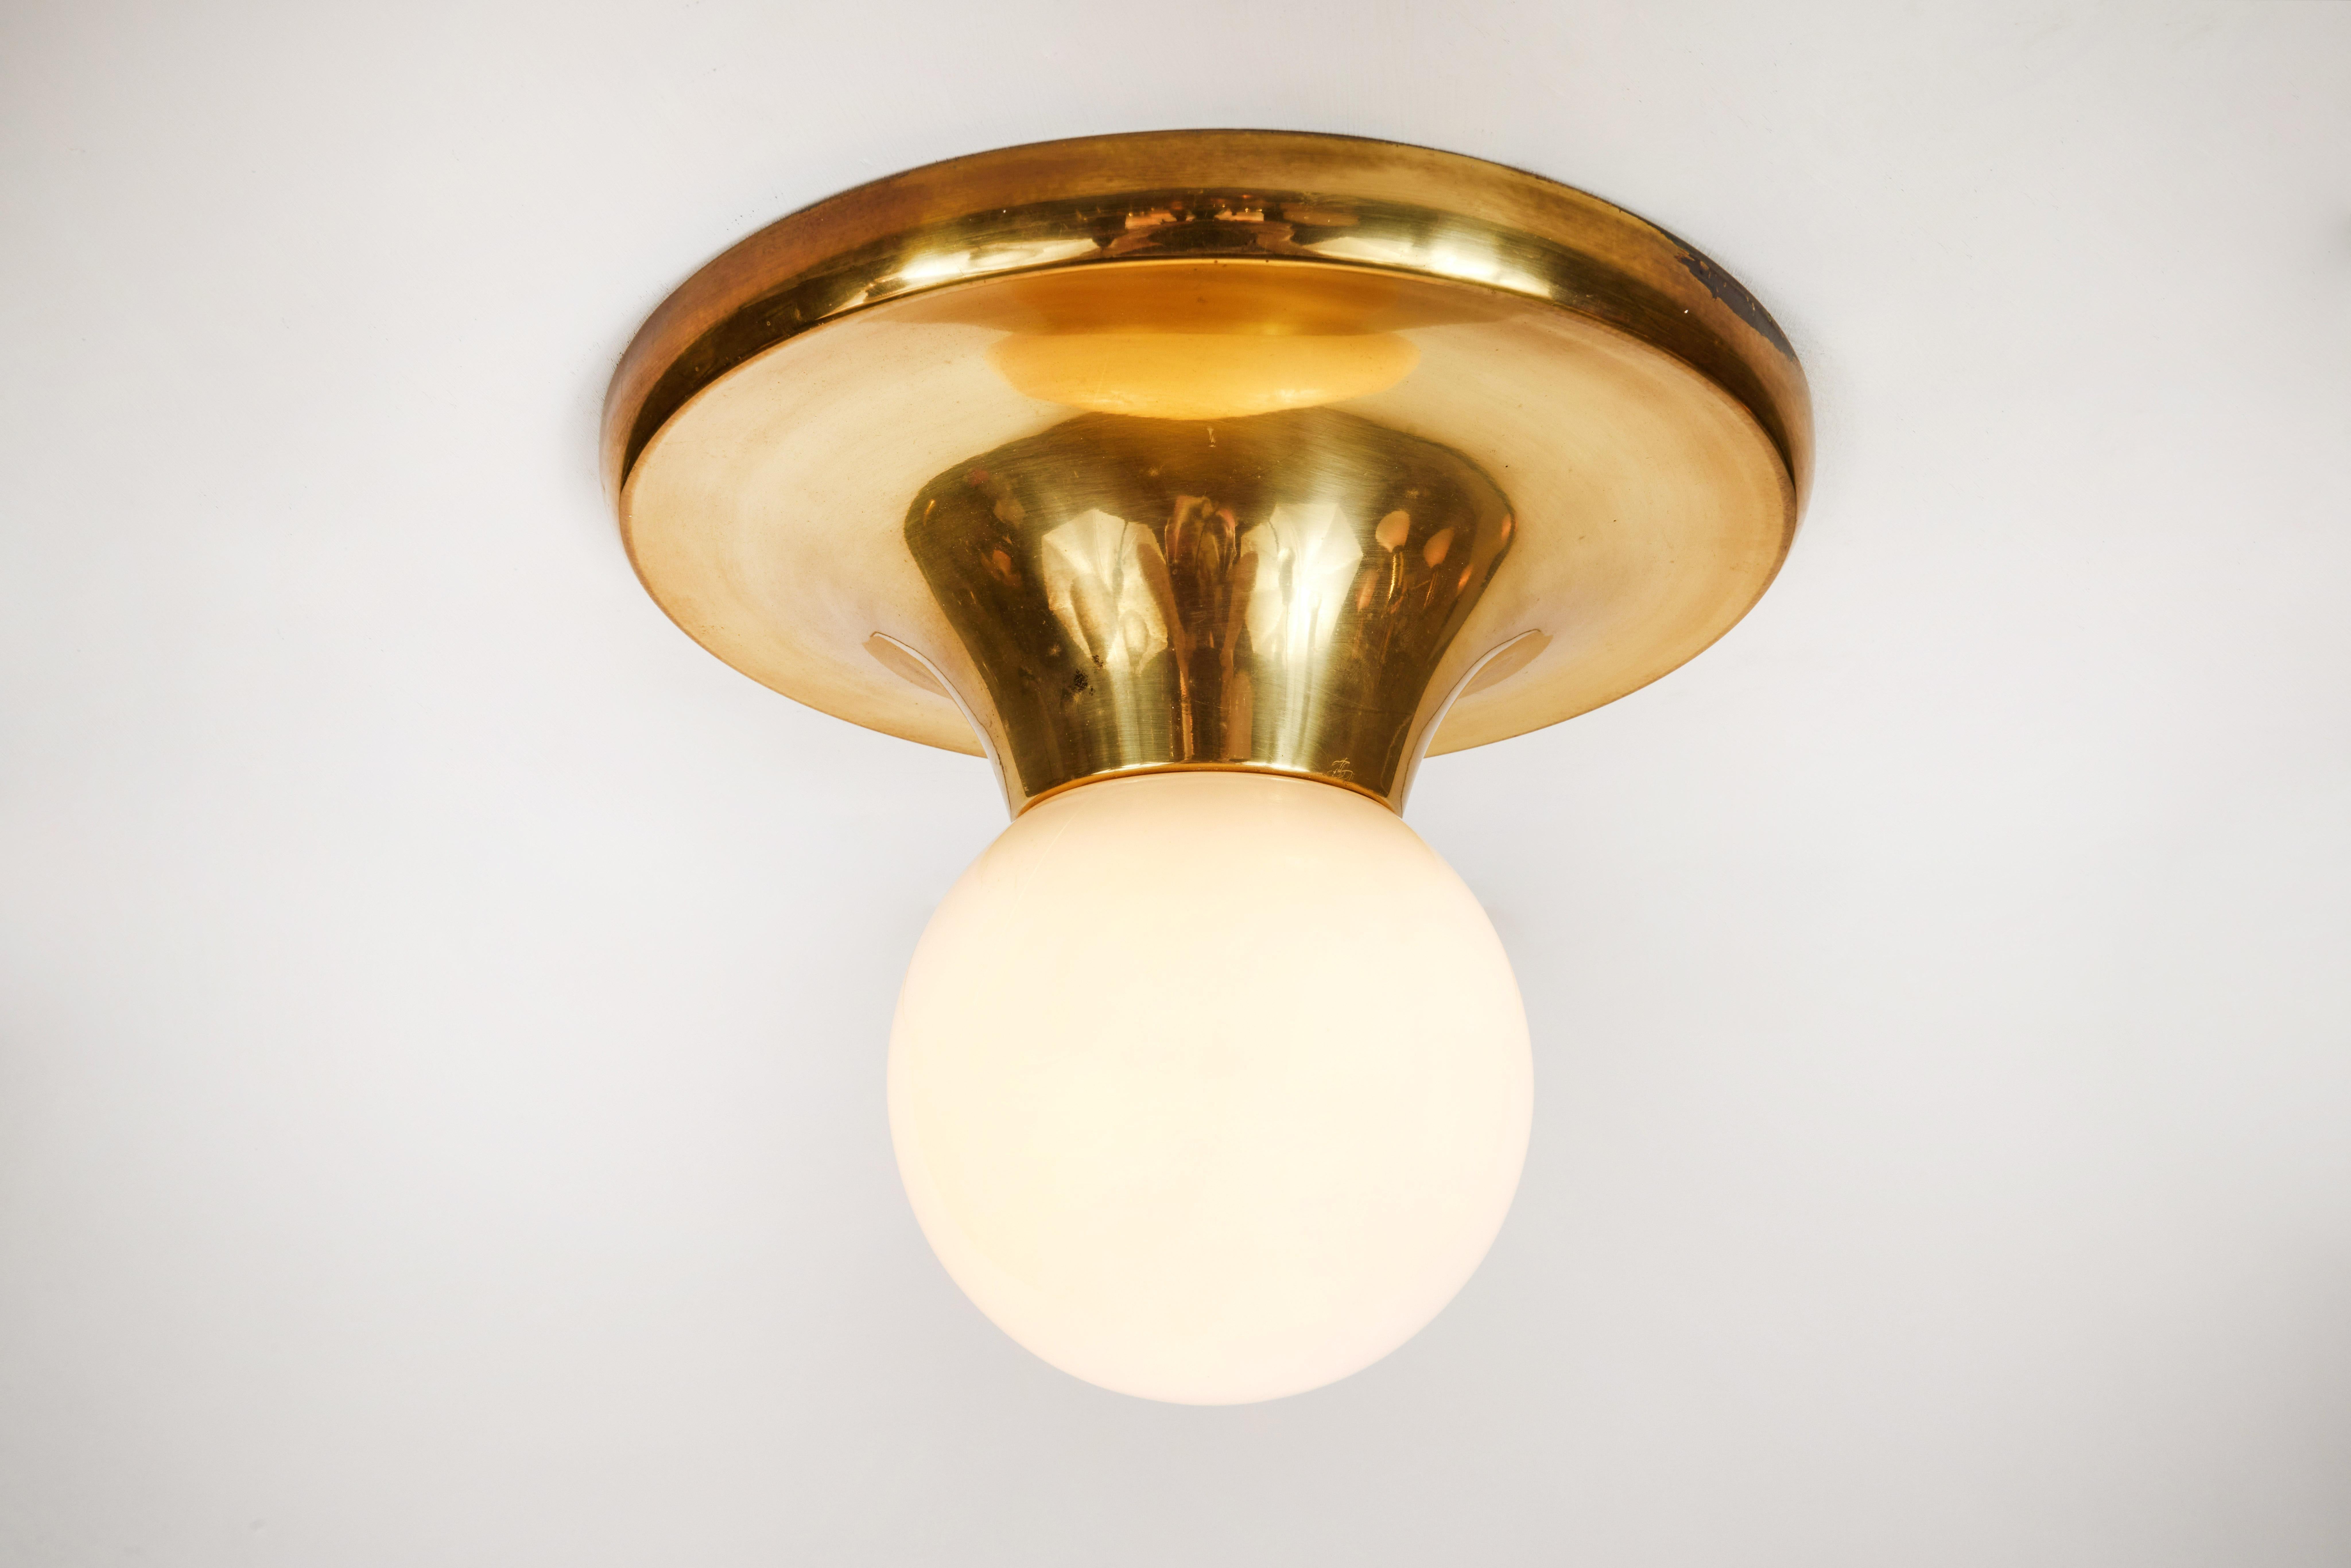 1960s Achille Castiglioni & Pier Giacomo 'Light Ball' Wall or Ceiling Lamp for Flos. Designed in 1965, this rare and vintage brass variant comes with opaque glass. An incredibly refined and iconic midcentury design that is quintessentially Italian.